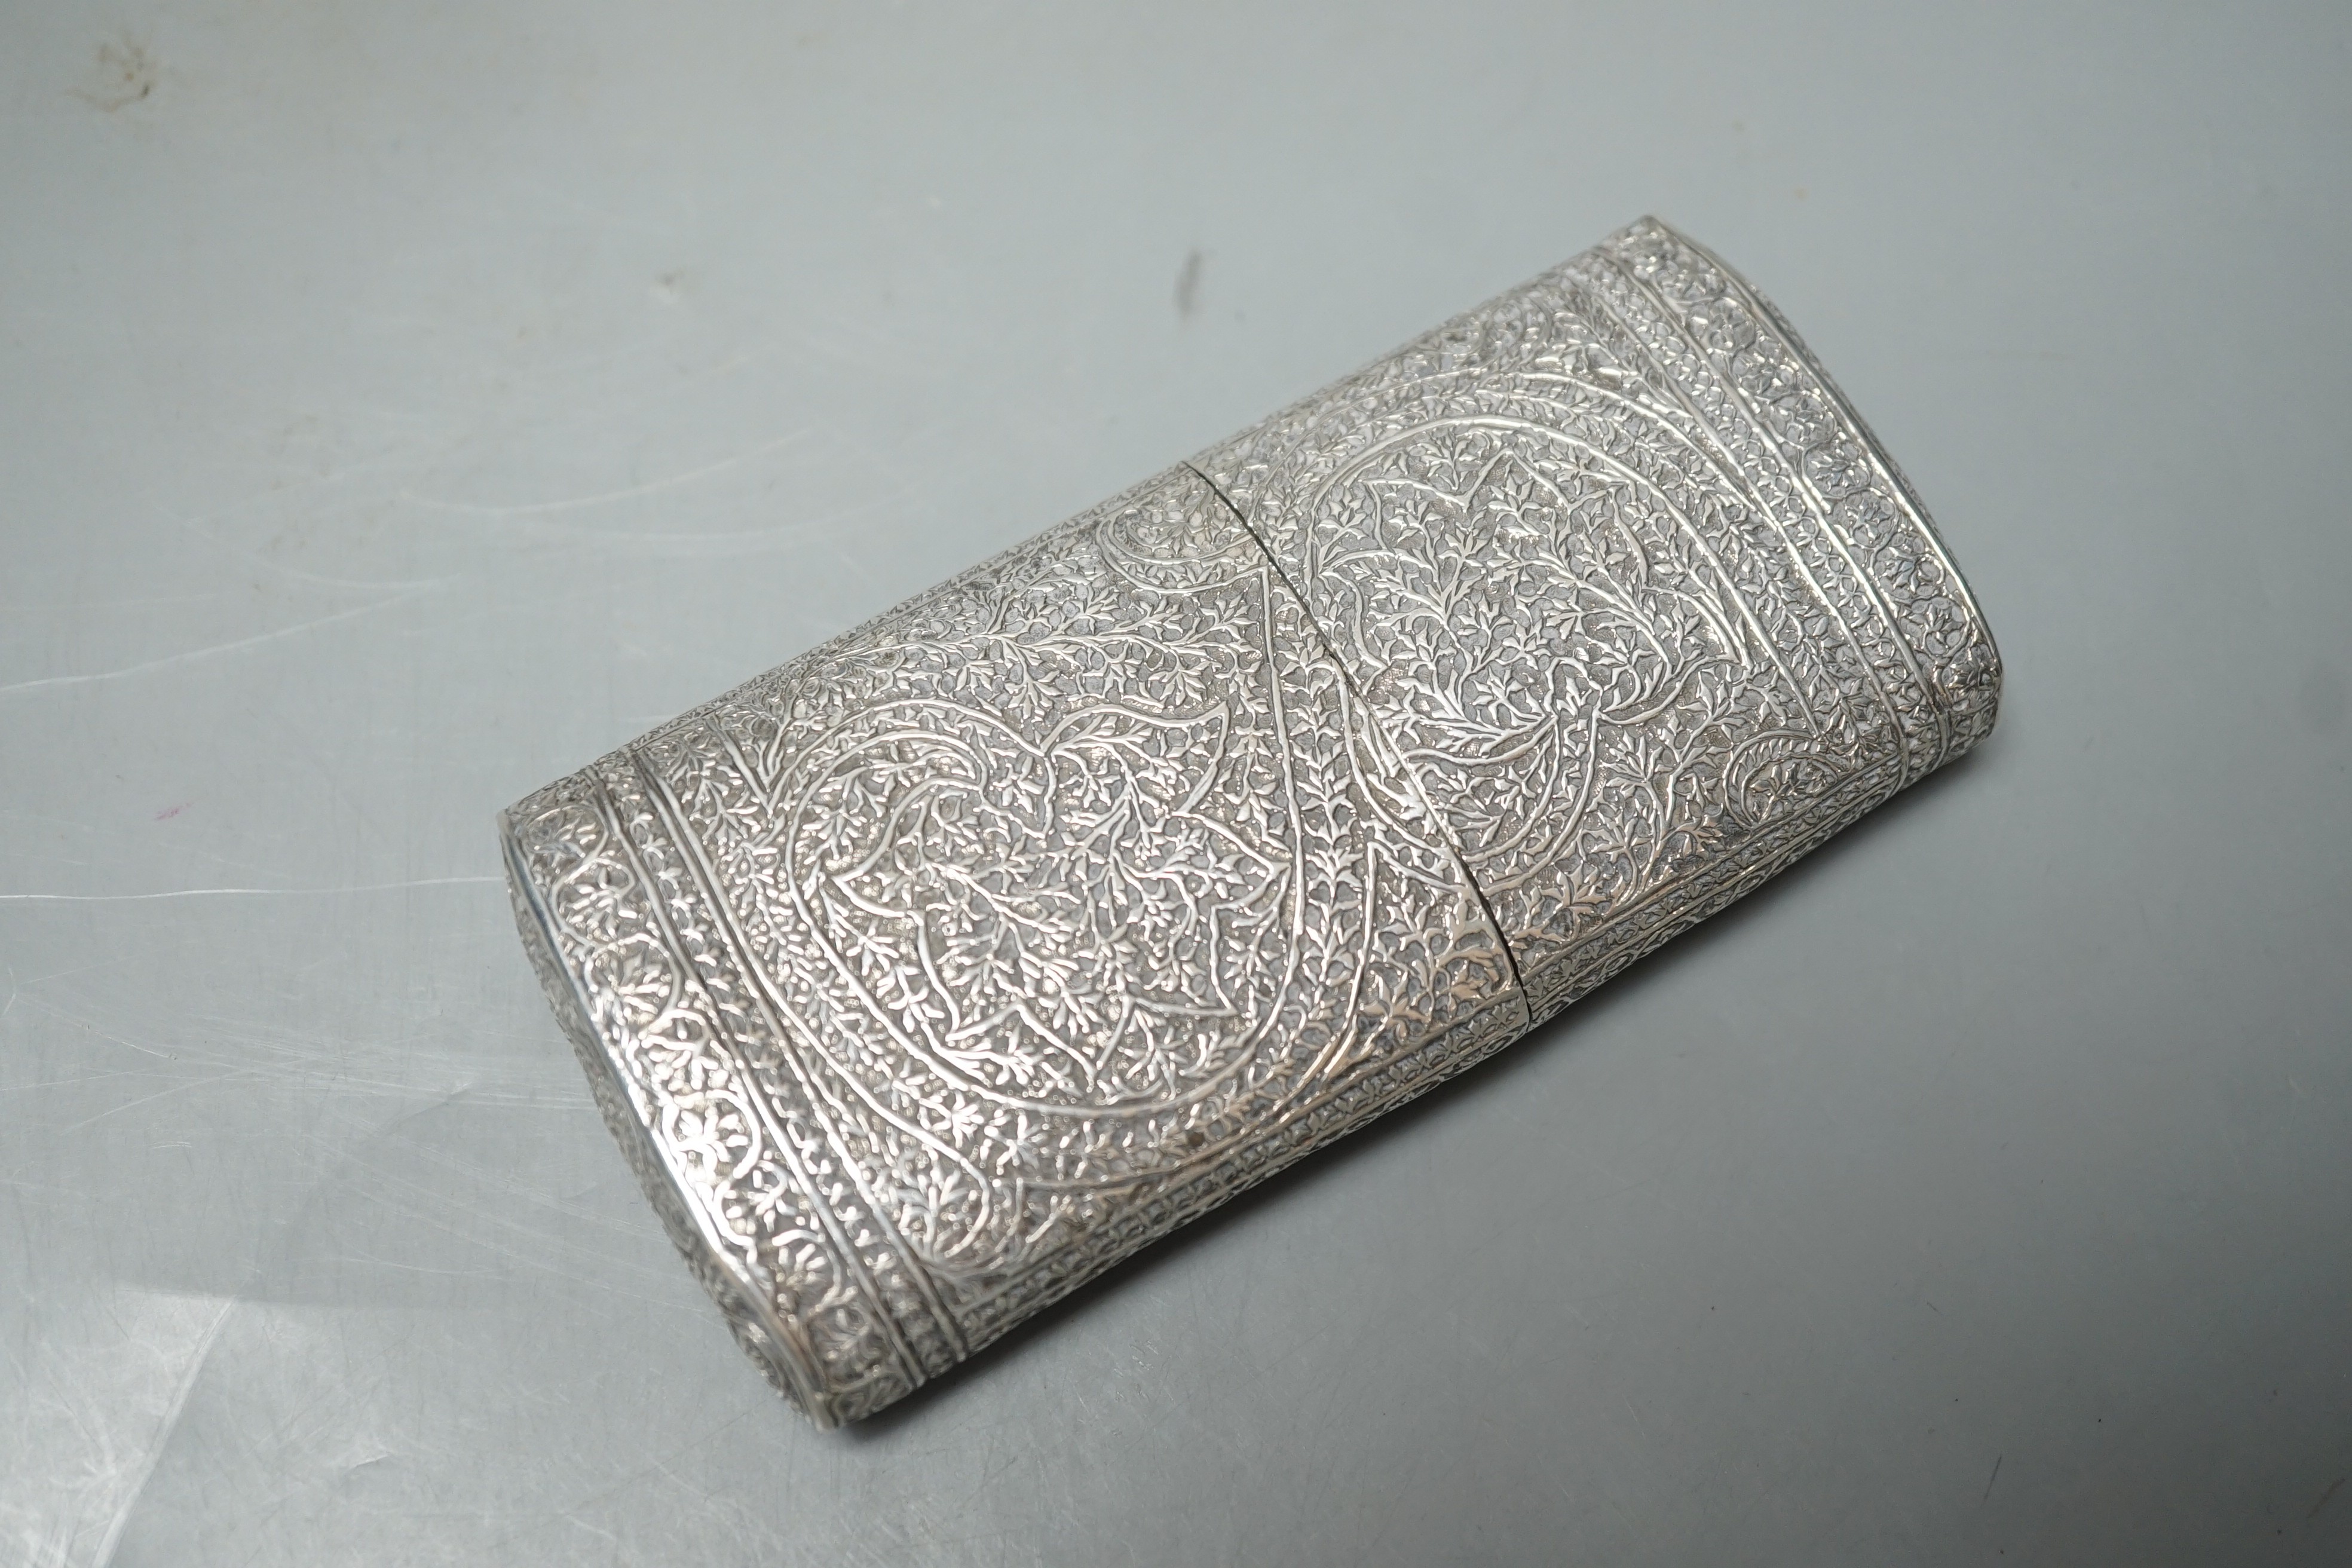 An Indian embossed white metal cigar case, 12.2cm and a similar canister and cover.